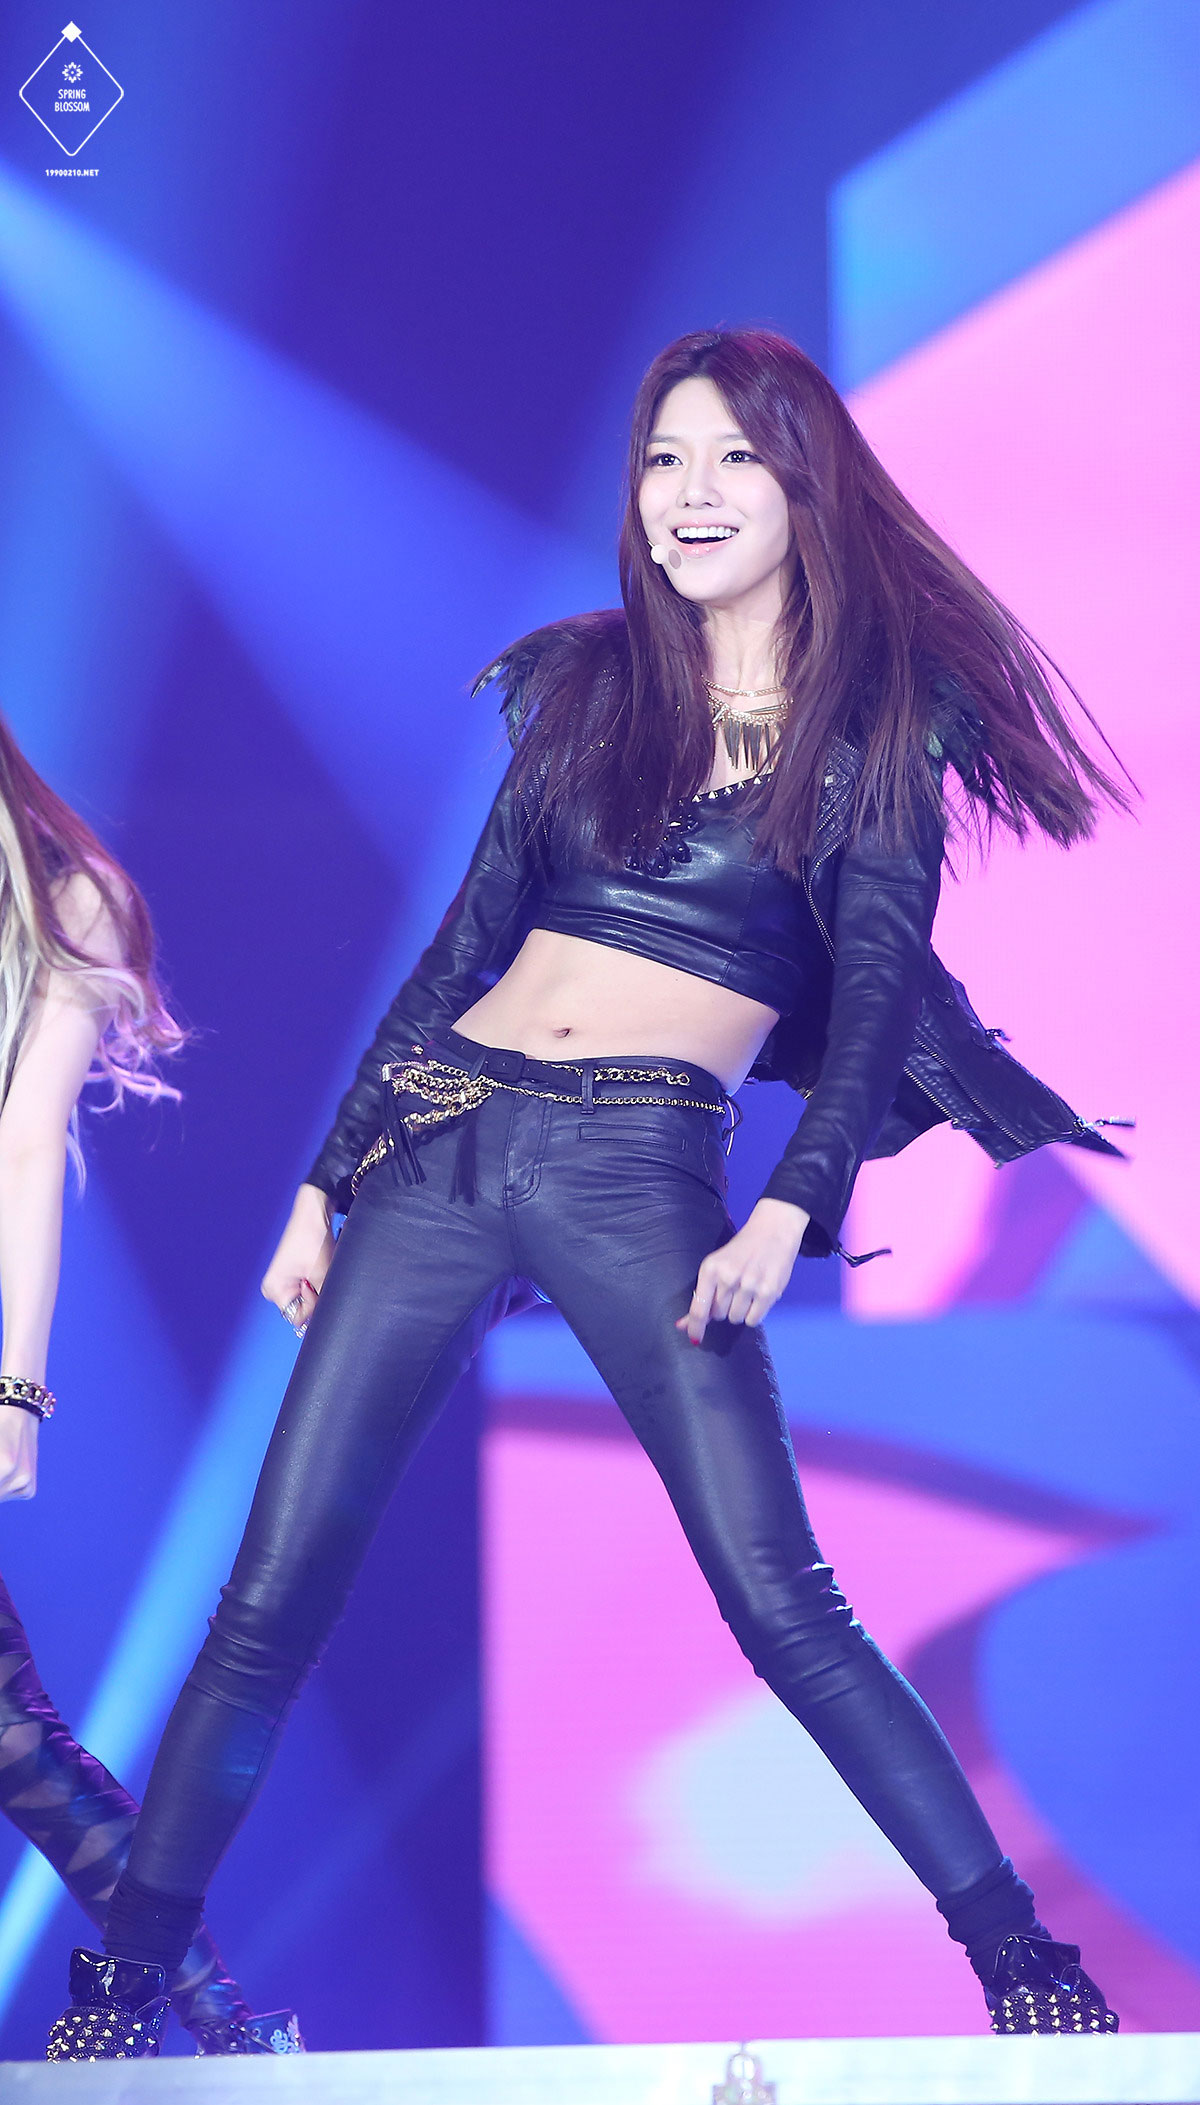 Sooyoung @ SBS Music Festival 2013